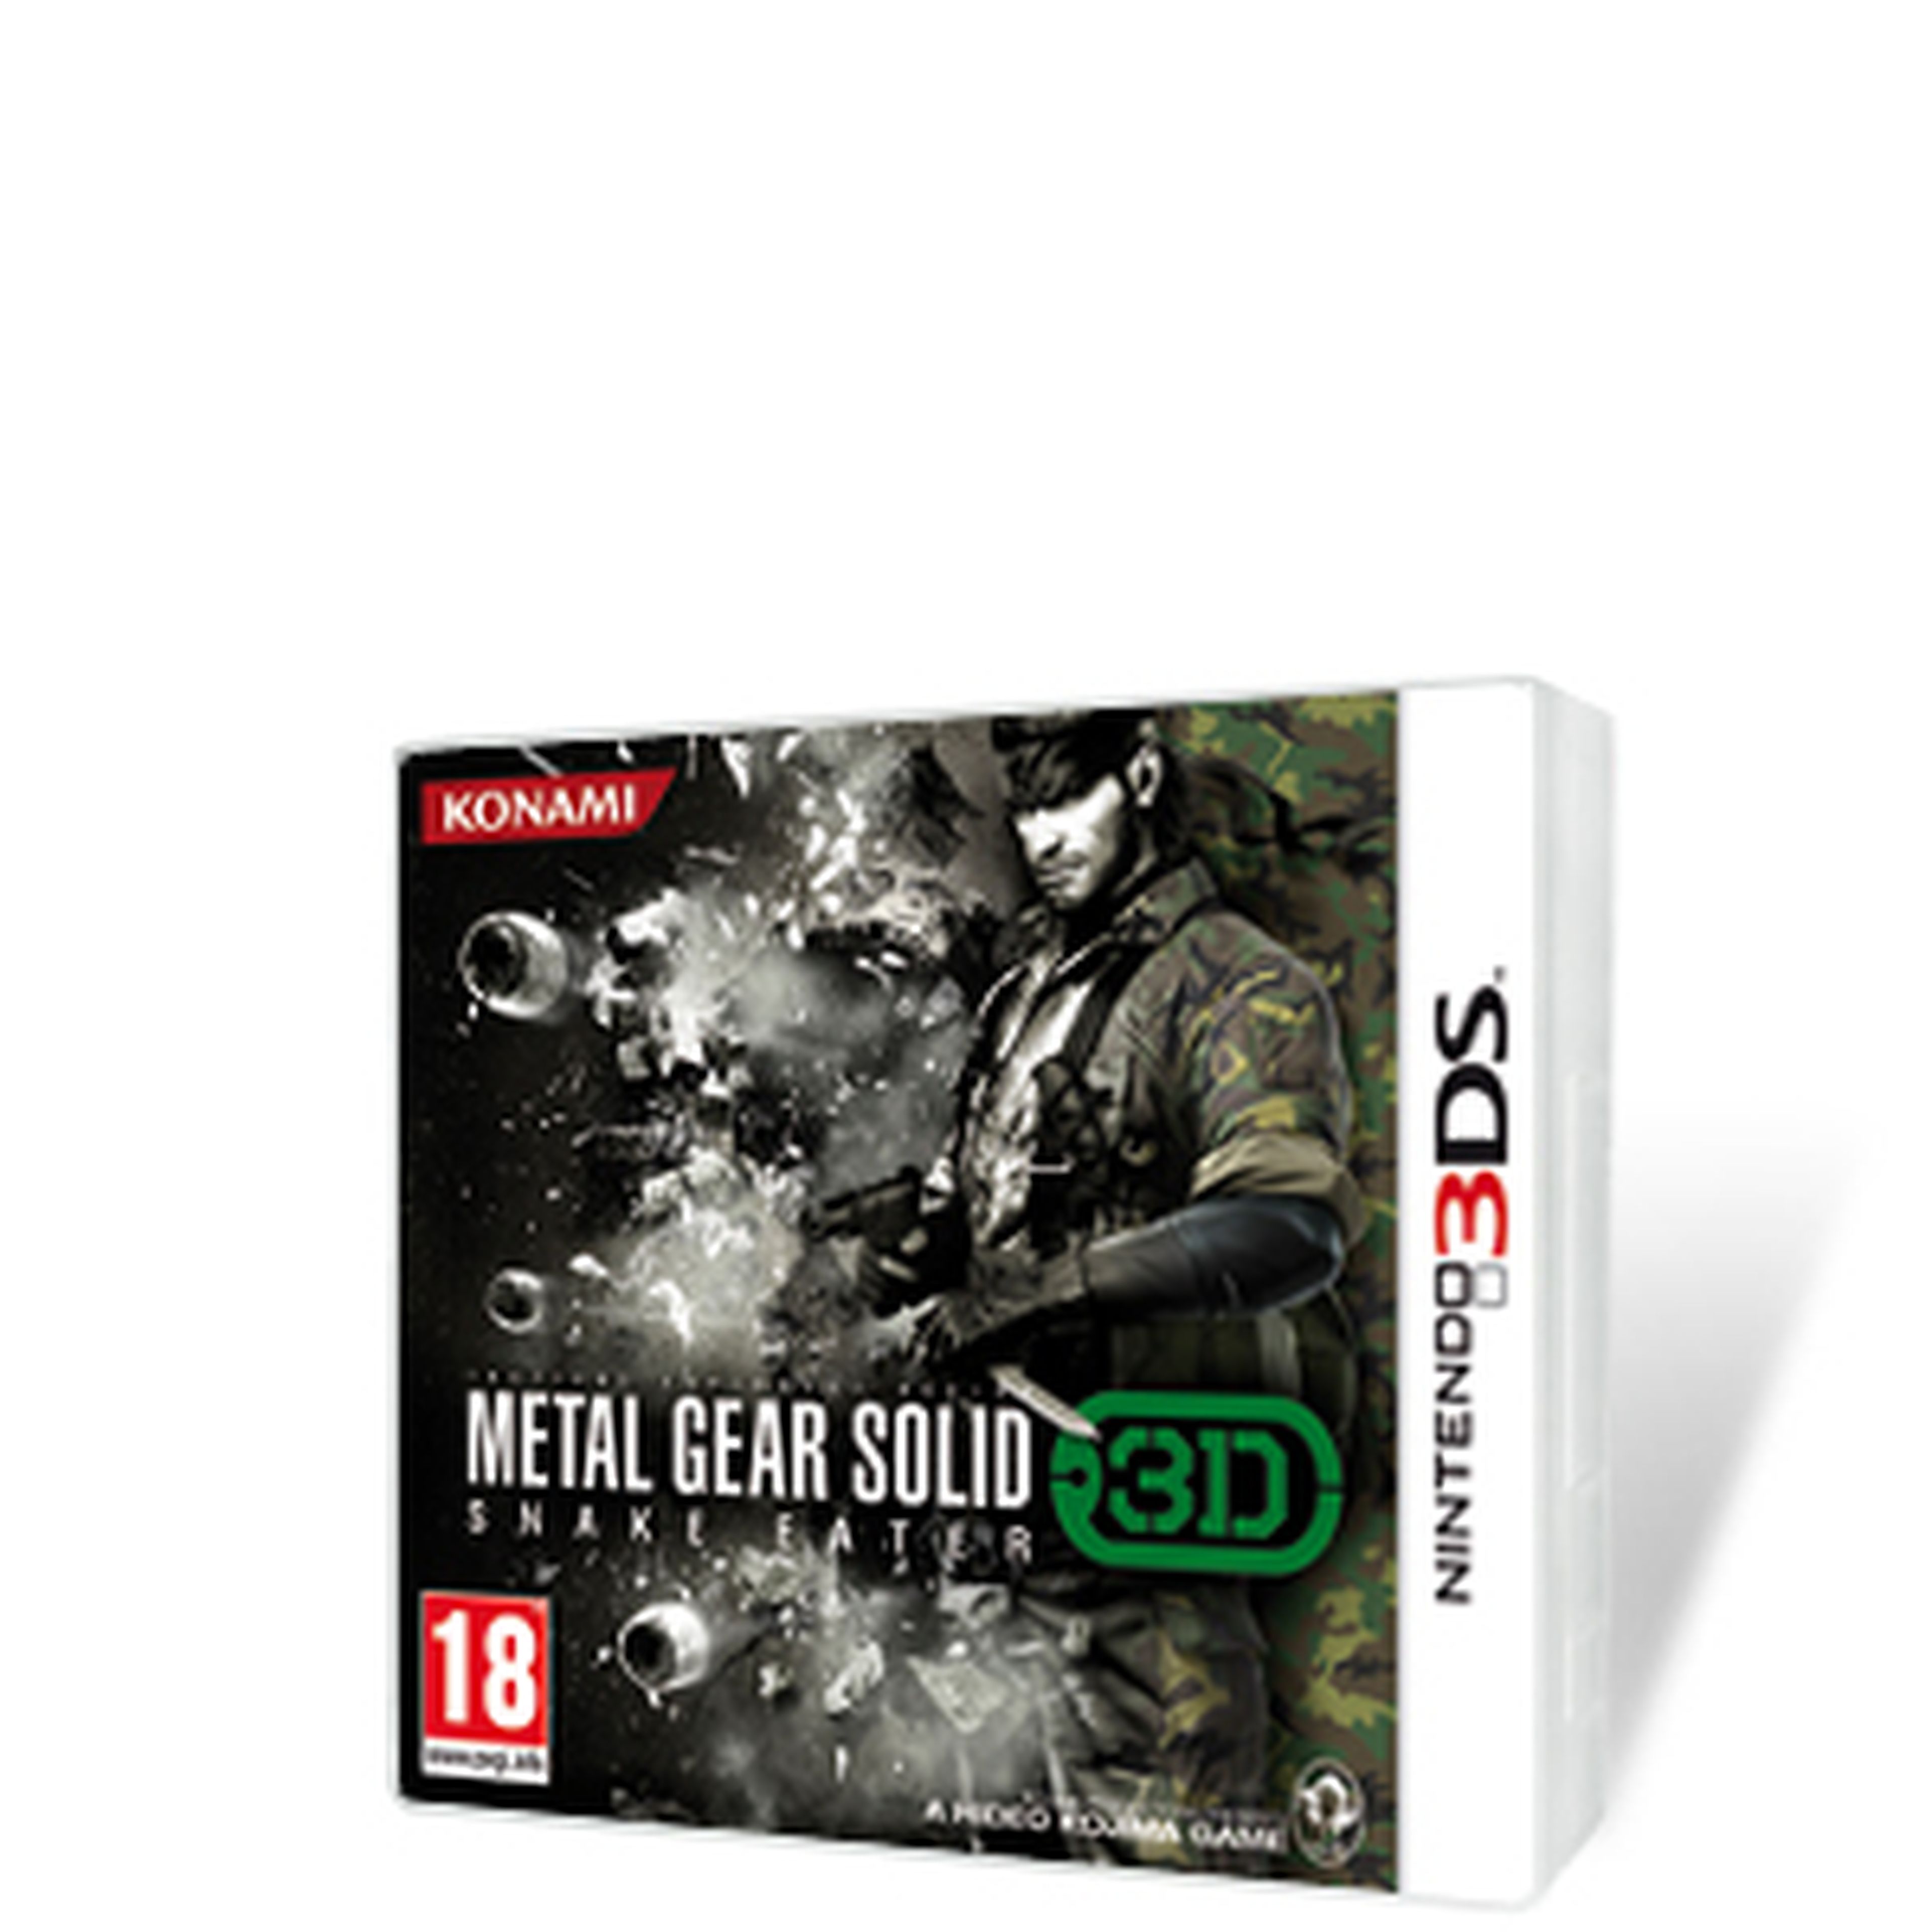 Metal Gear Solid Snake Eater 3D para 3DS